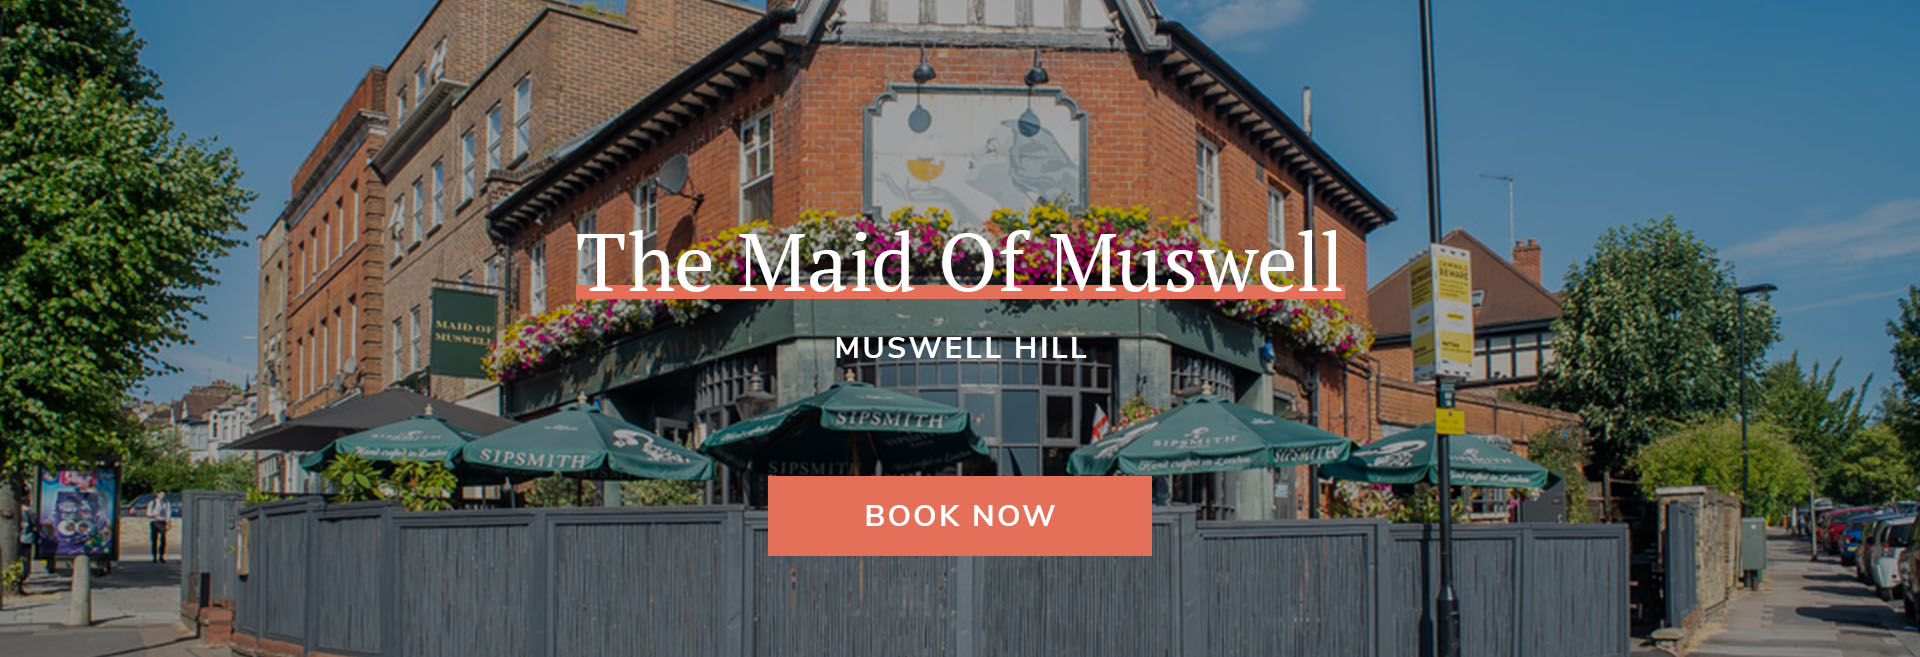 The Maid Of Muswell Banner 1